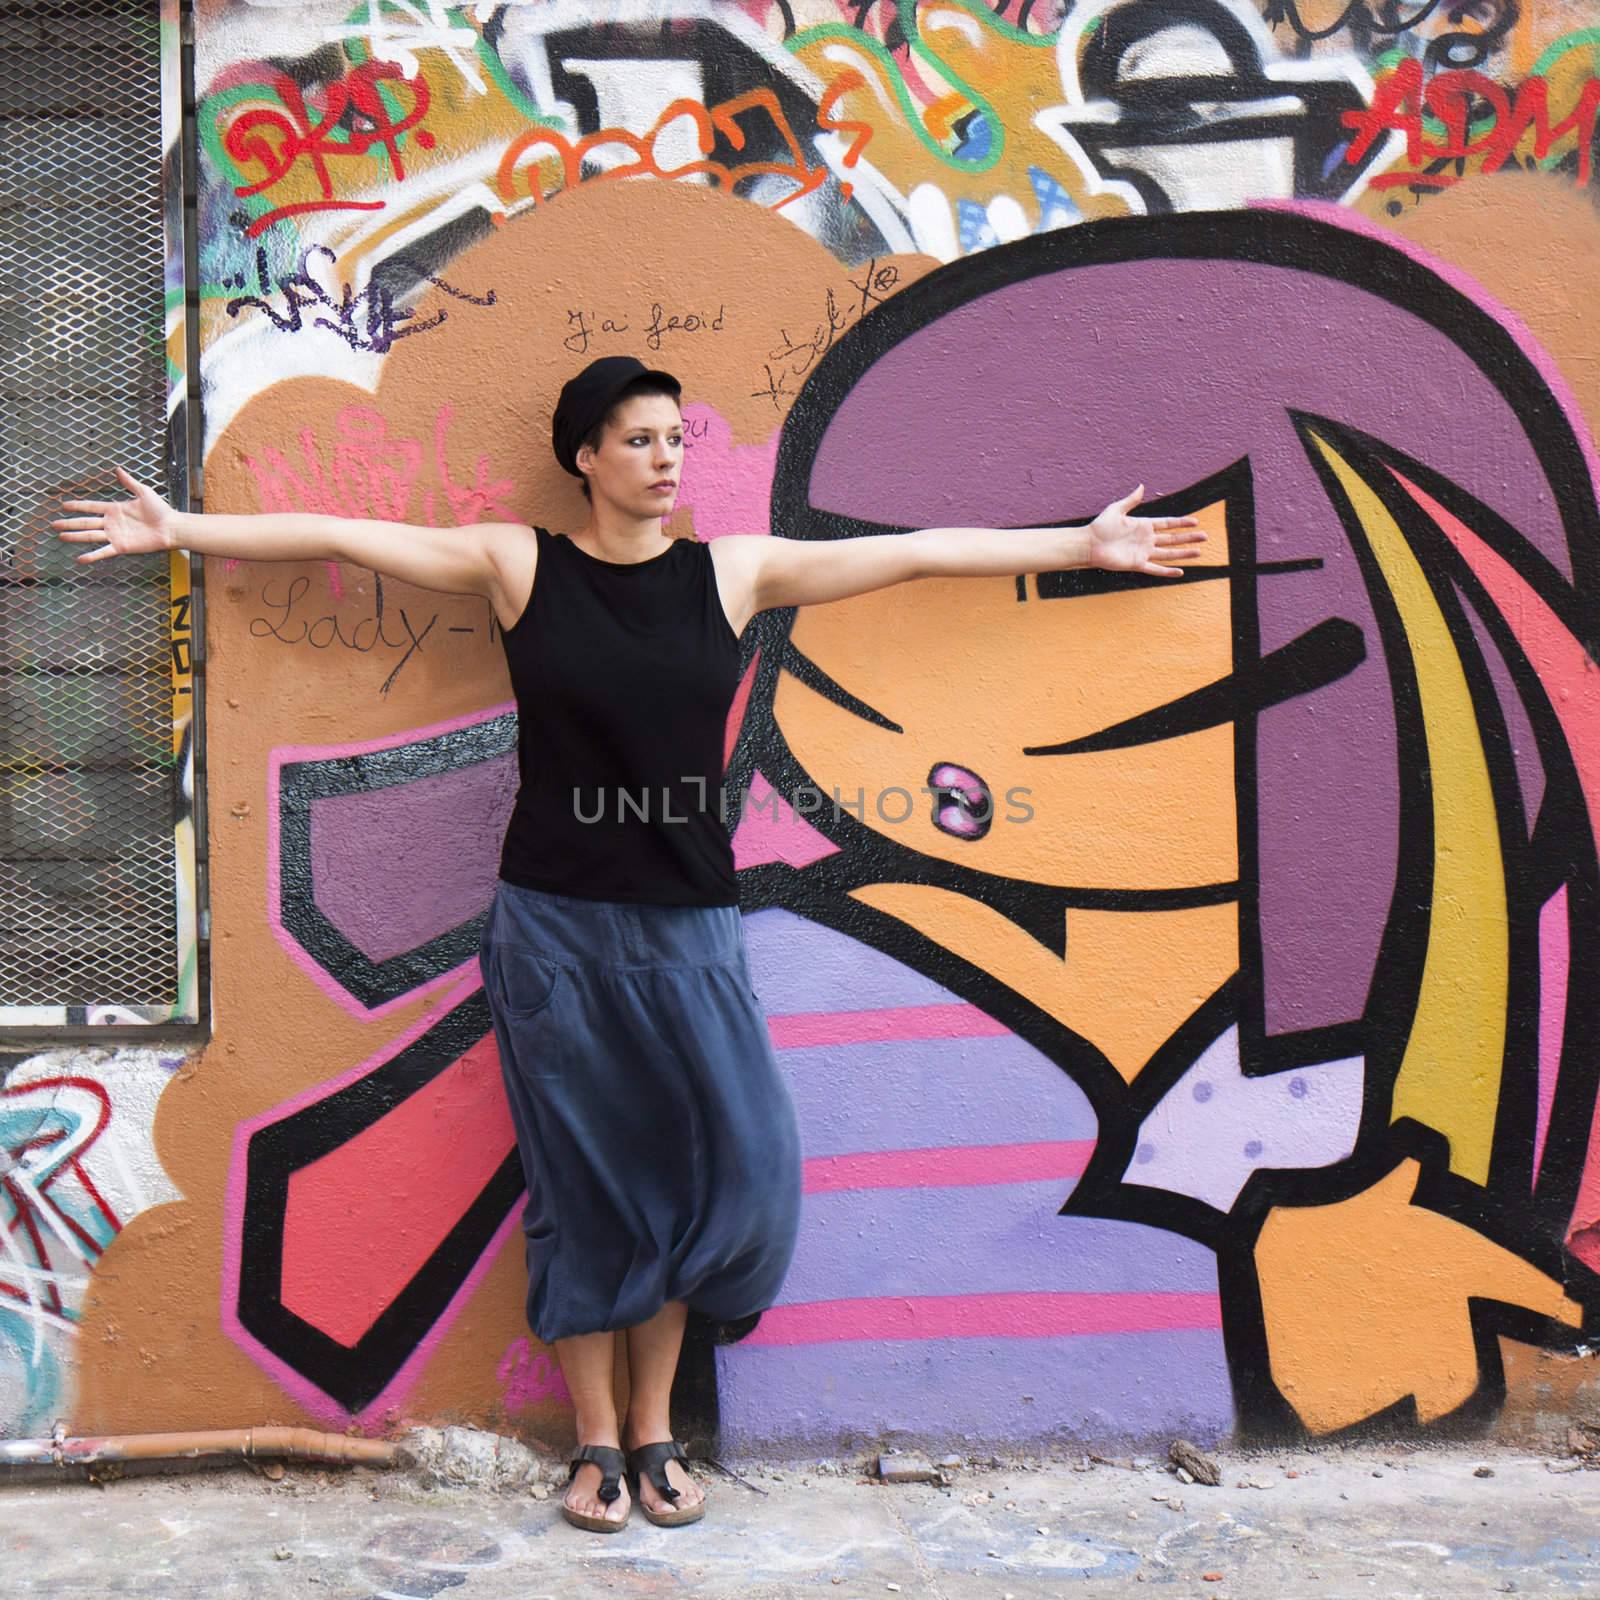 A young girl stands before a wall covered with graffiti, arms outstretched